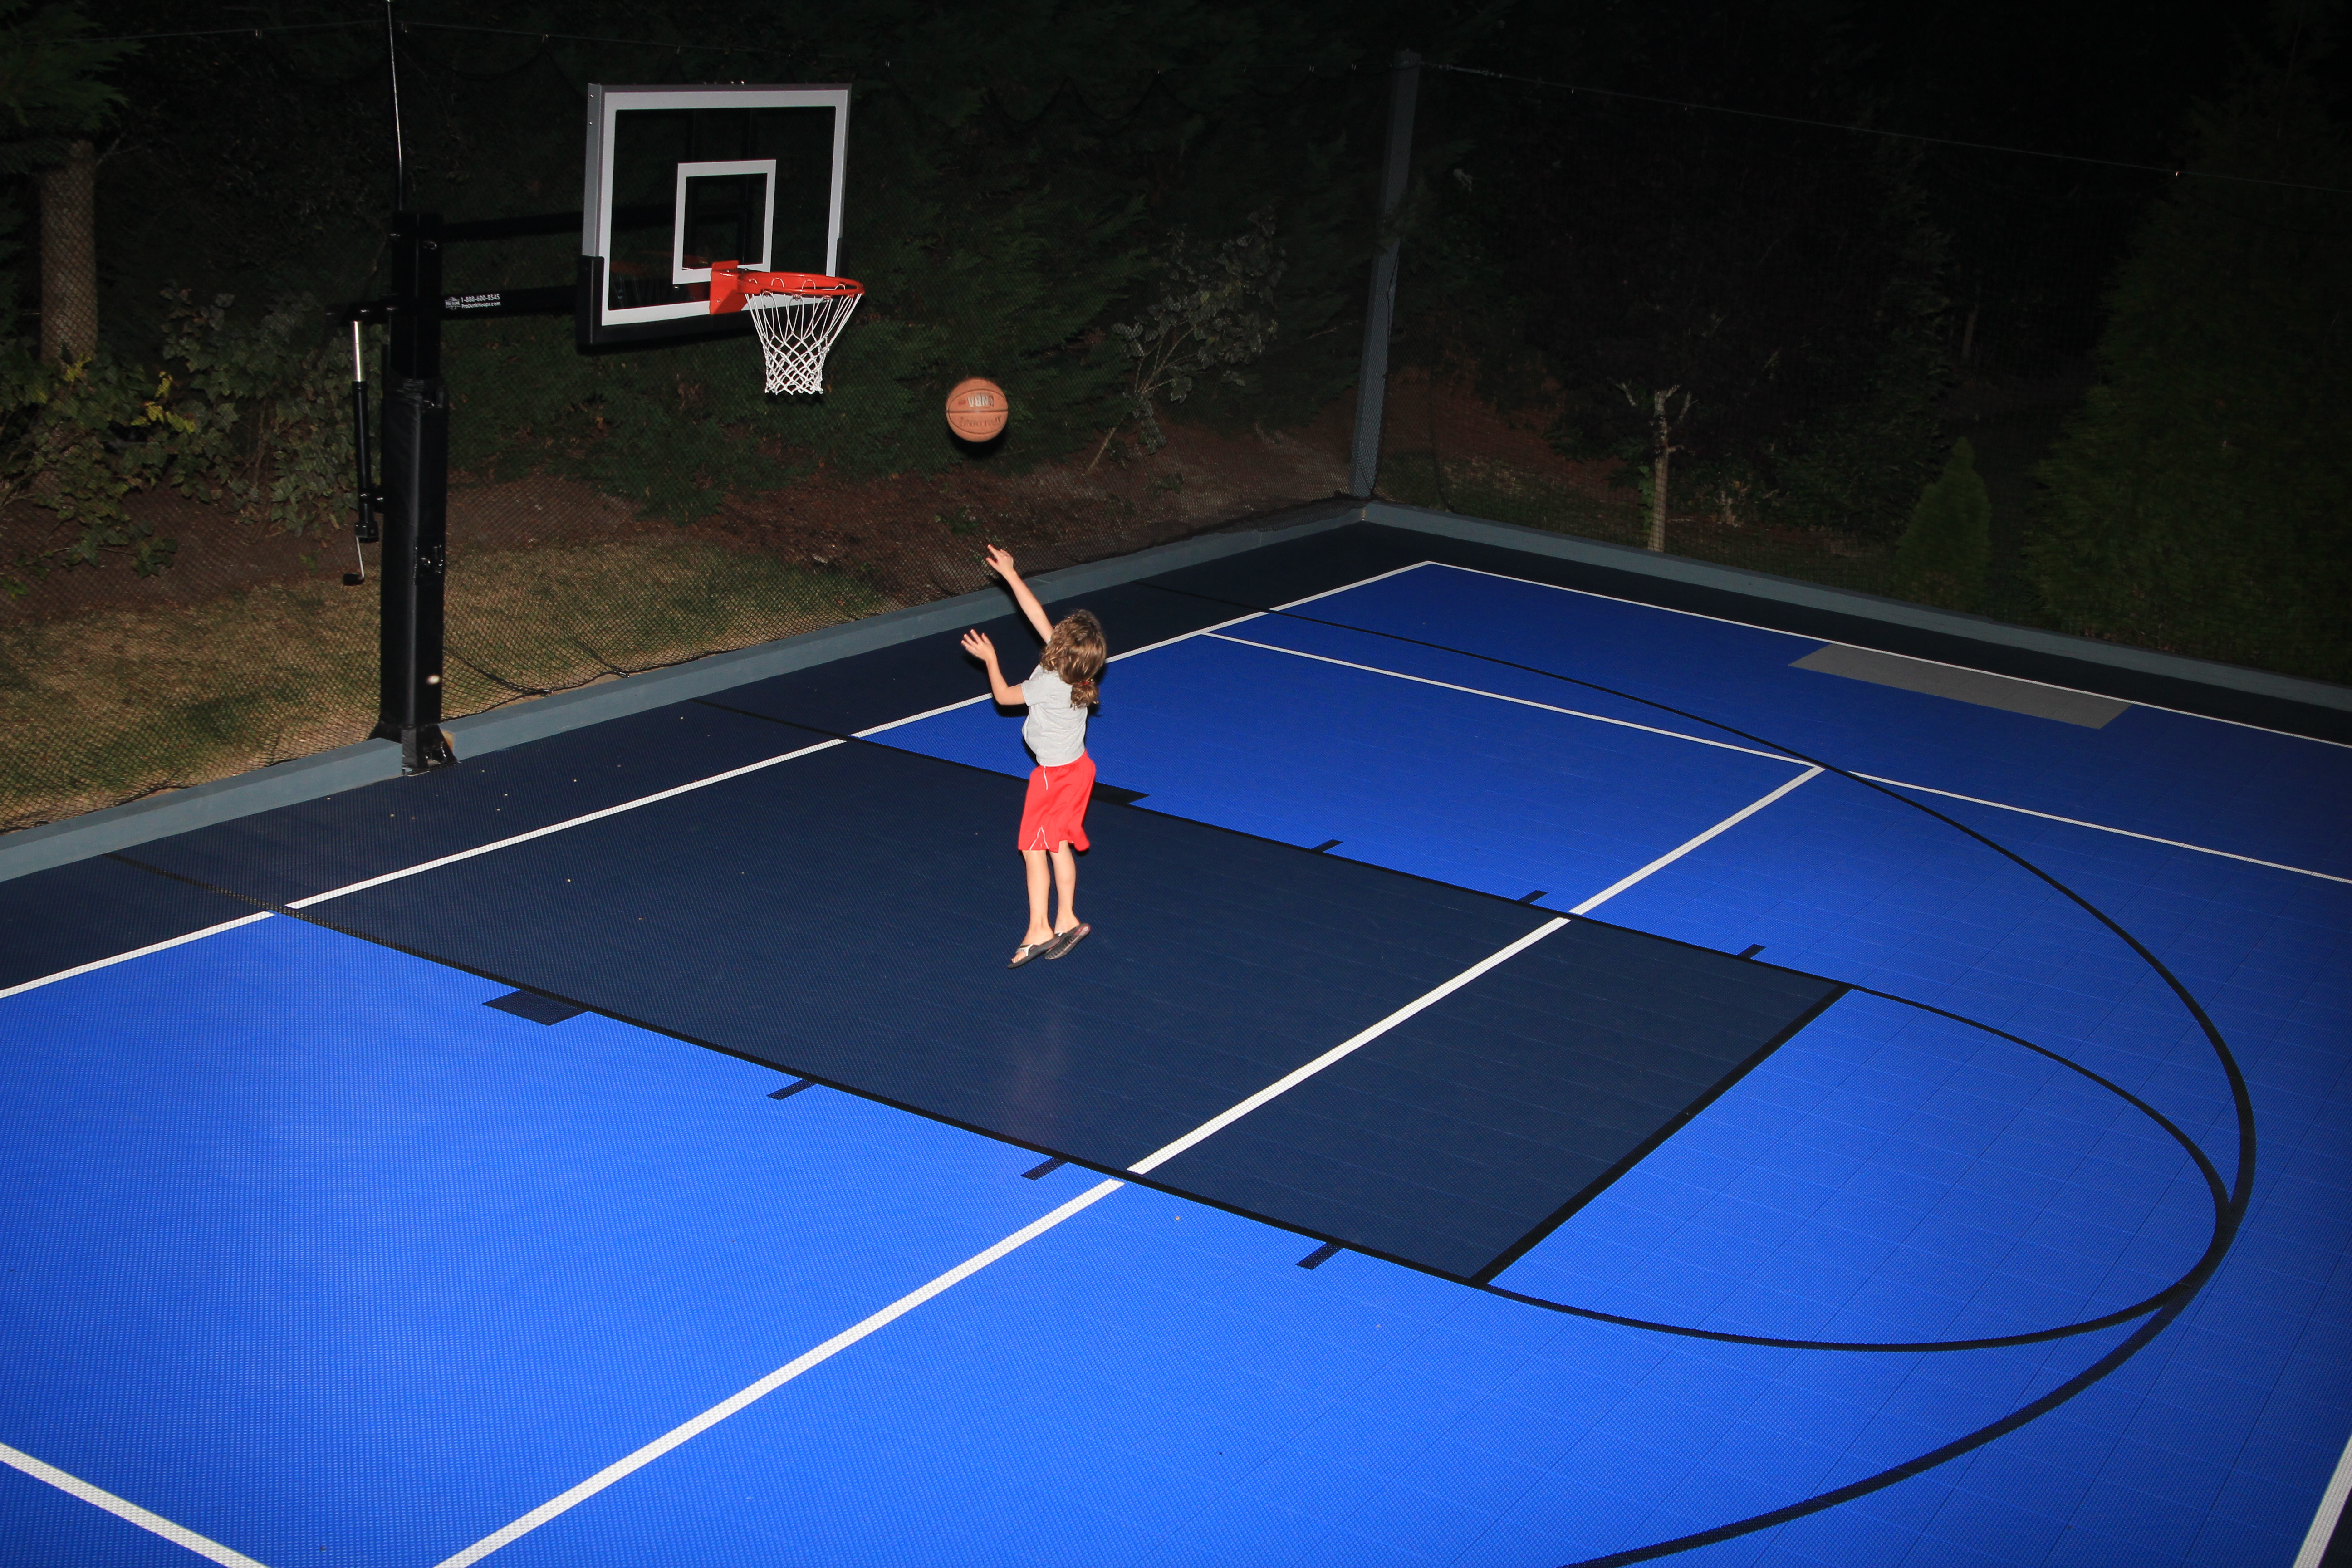 There is an aerial view of a girl shooting at a Pro Dunk Basketball System.